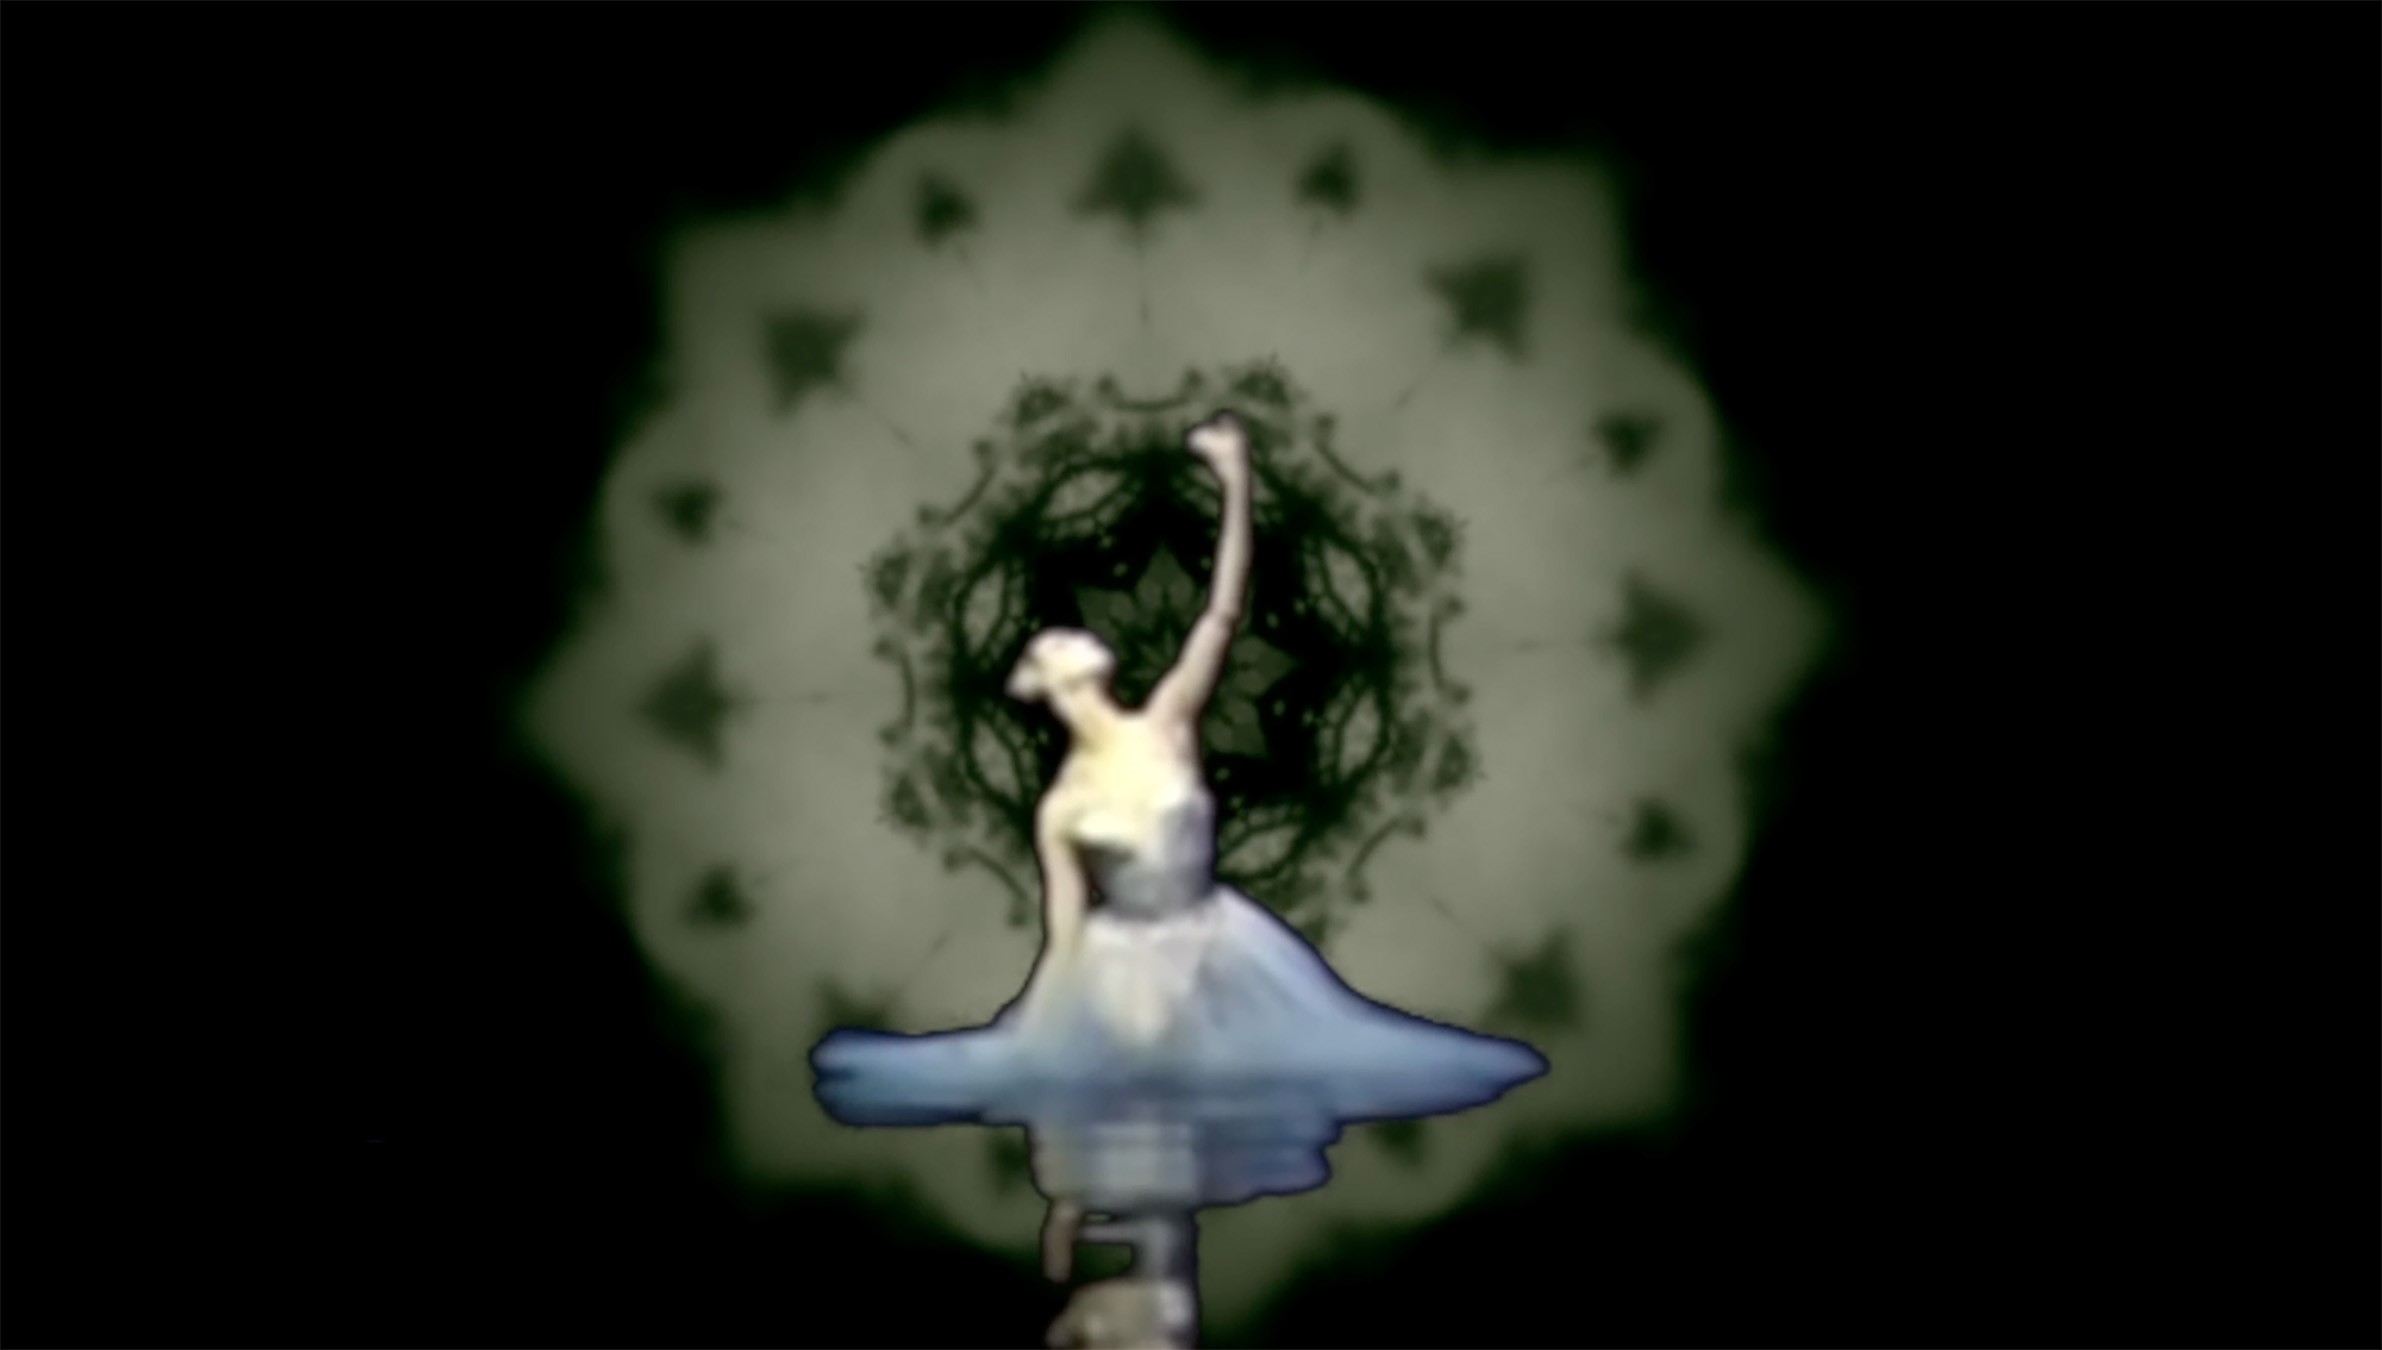 Textual analysis I by Simon Rose. An image of what appears to be a distorted ballet dancer, with a holographic image behind.